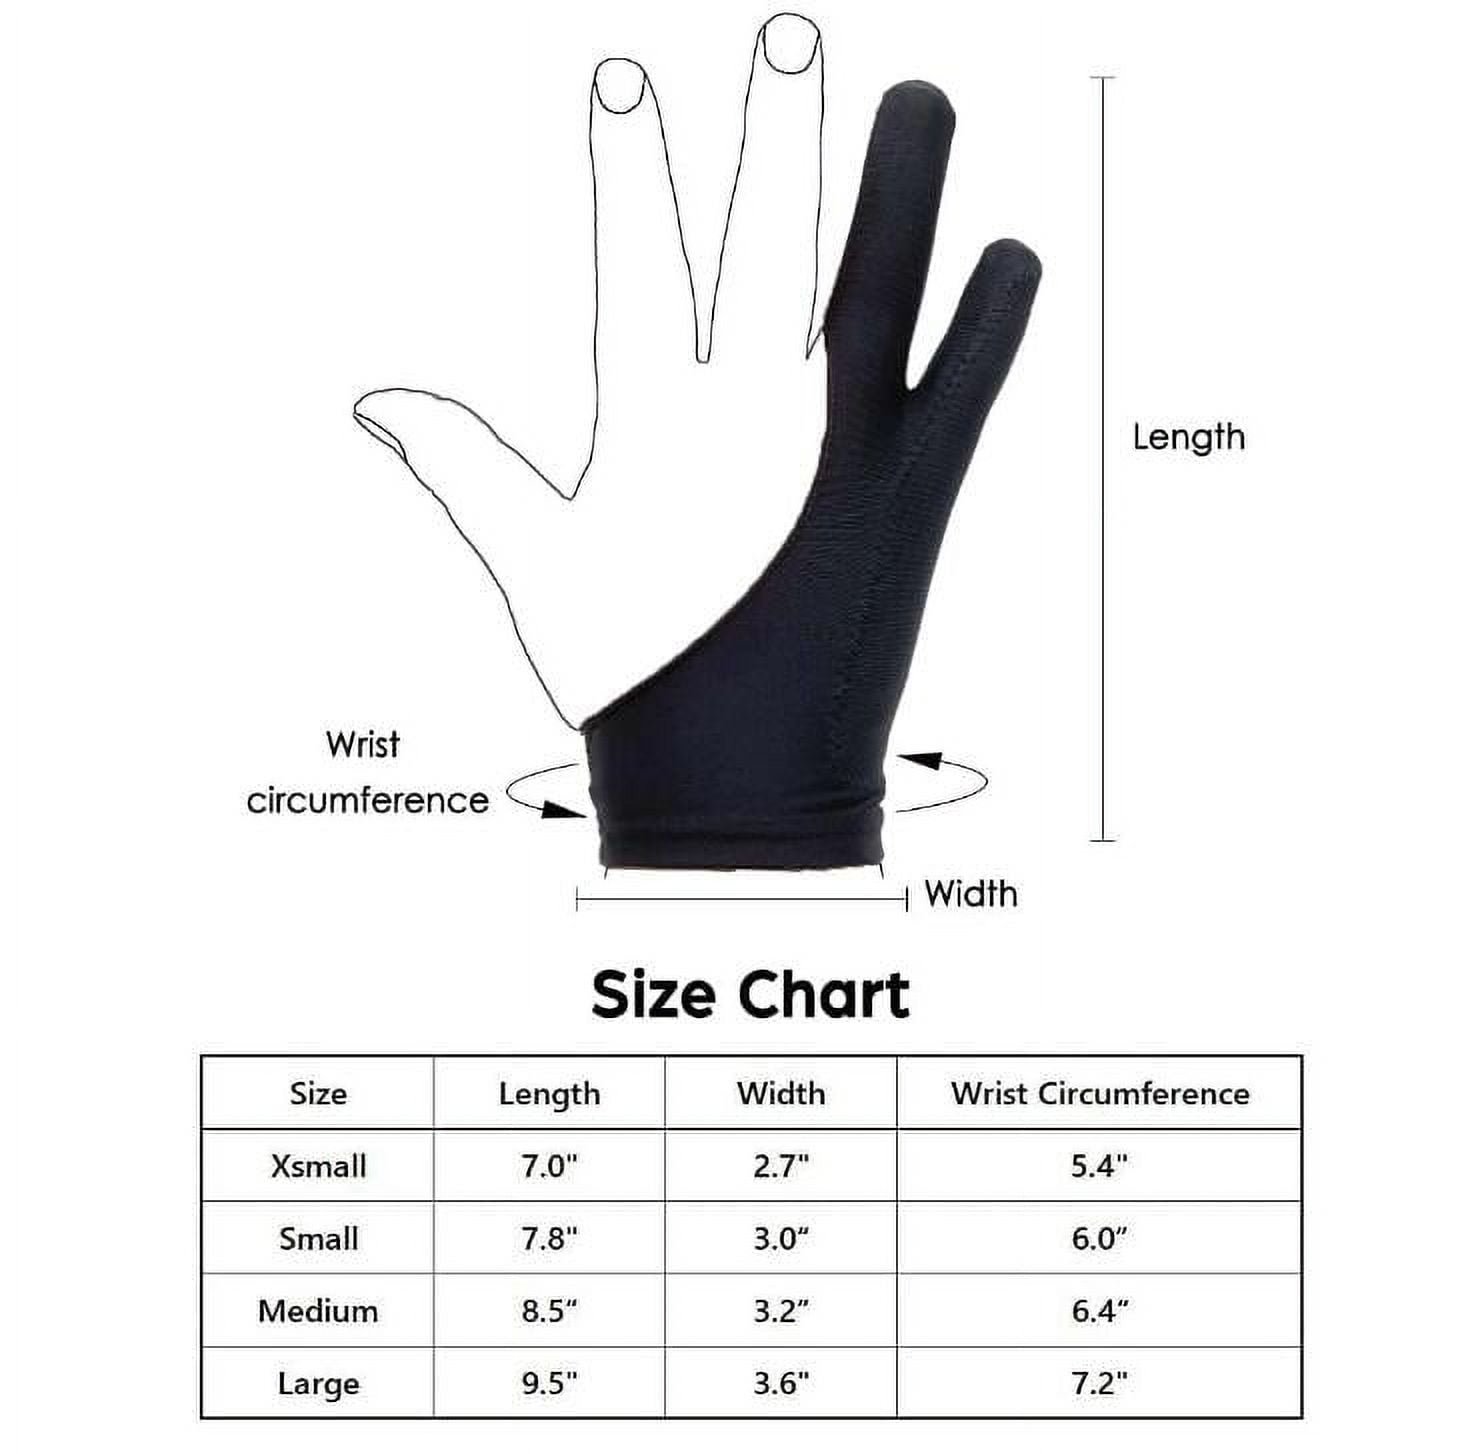 Drawing Glove S, Artist Glove for Drawing Tablet iPad, Palm